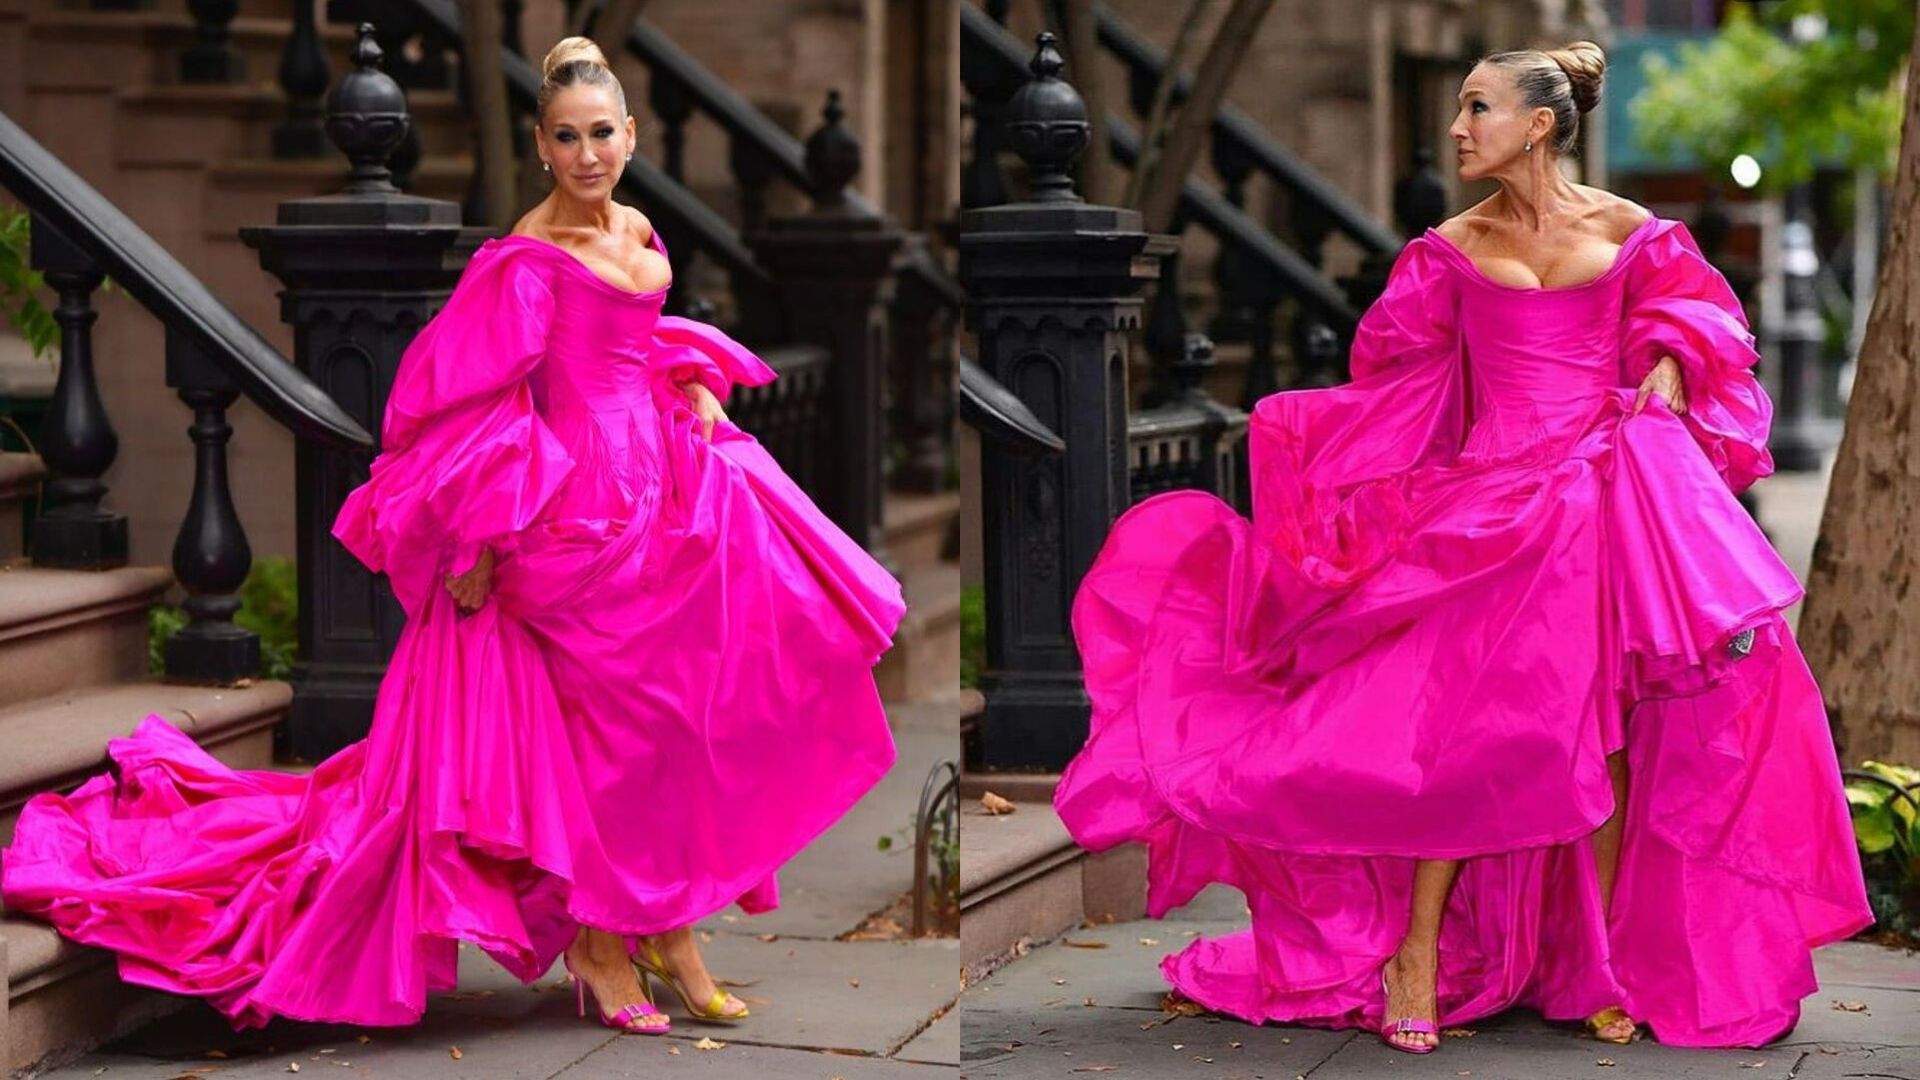 Sarah Jessica Parker Just Had A Major Carrie Bradshaw Moment in NYC